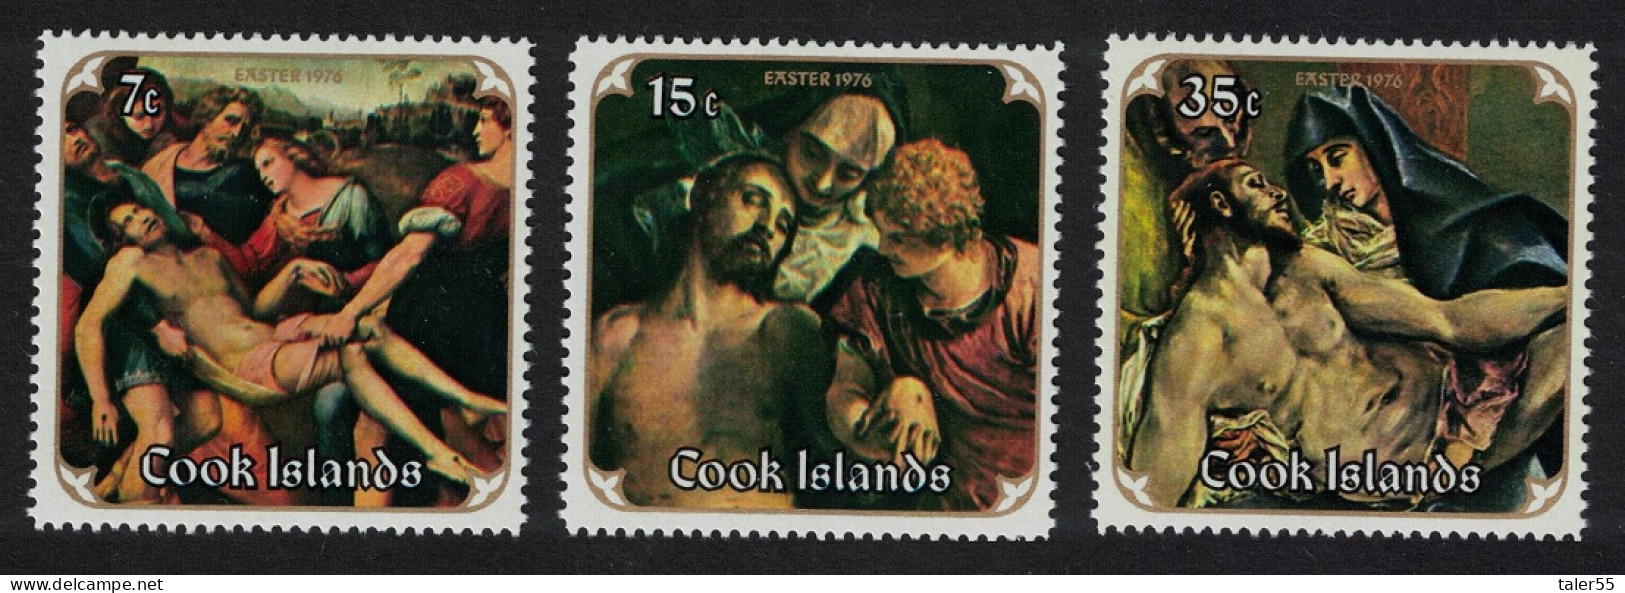 Cook Is. Easter Paintings By Raphael Veronese El Greco 3v 1976 MNH SG#536-538 Sc#442-444 - Islas Cook